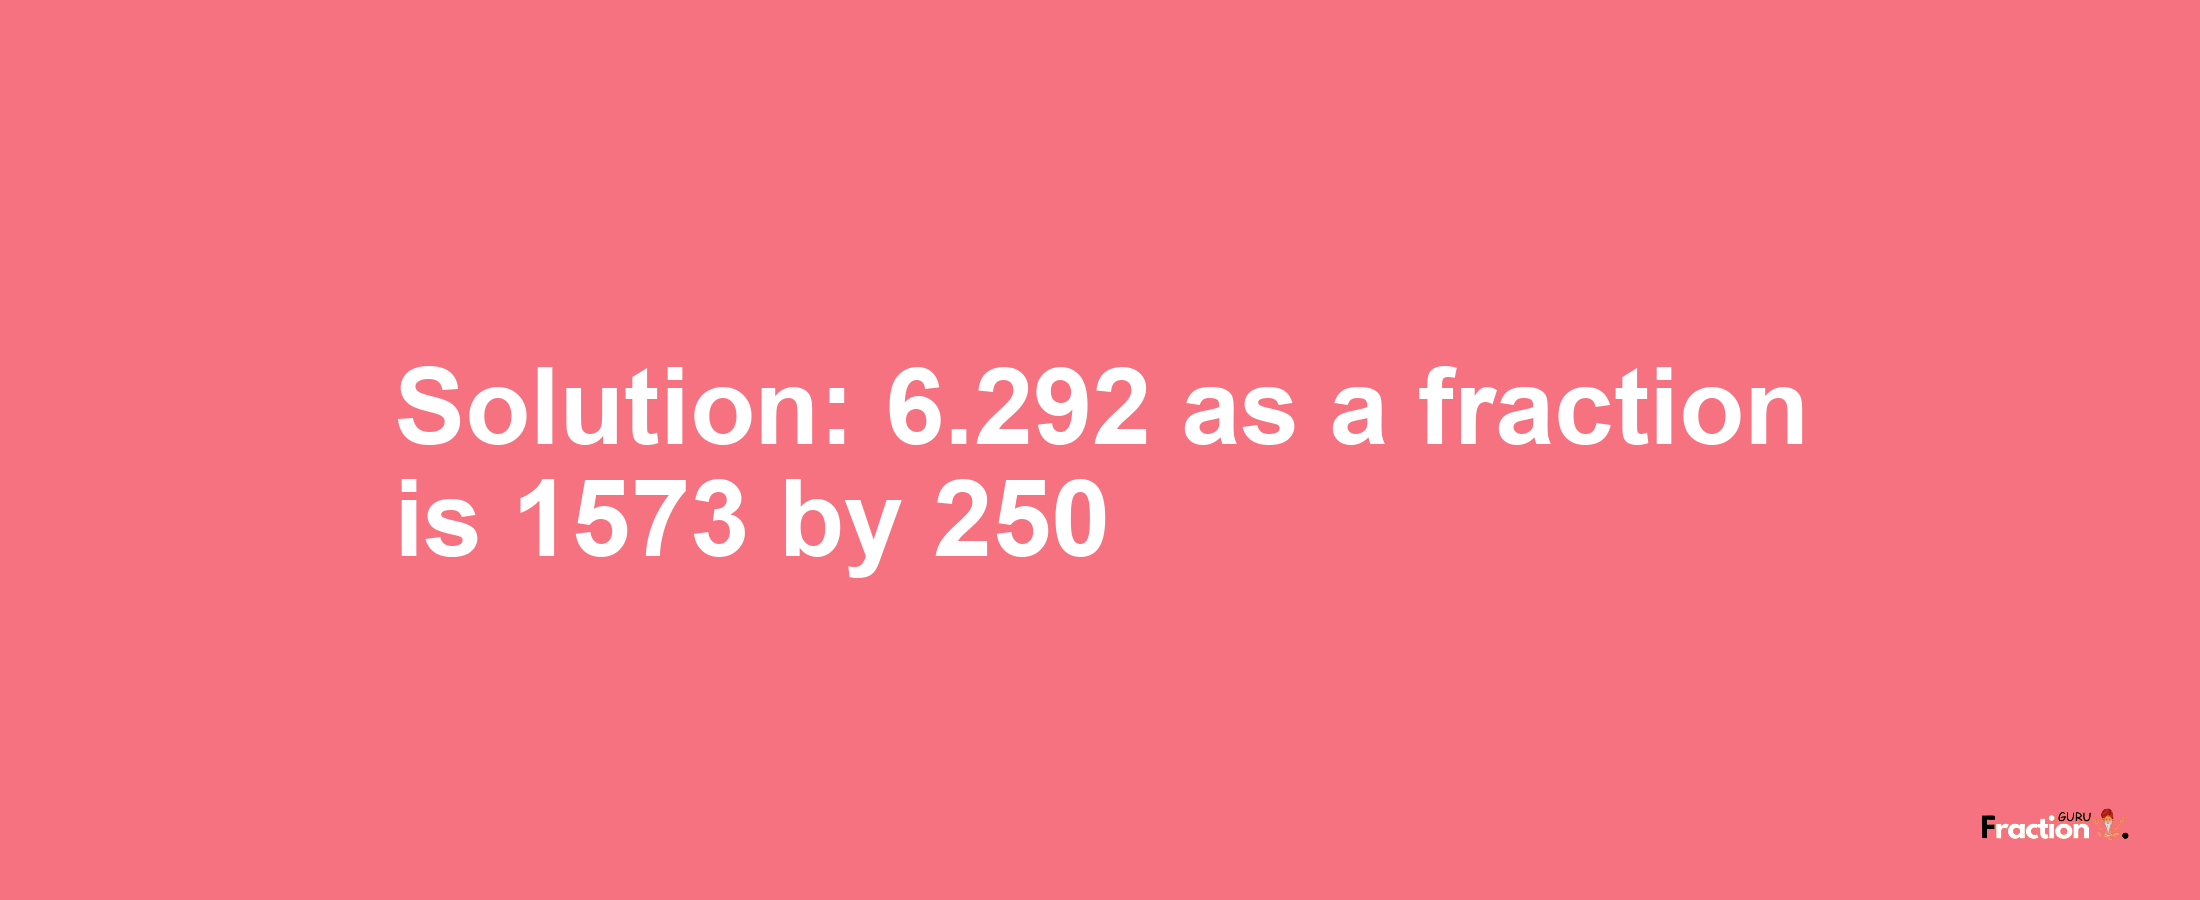 Solution:6.292 as a fraction is 1573/250